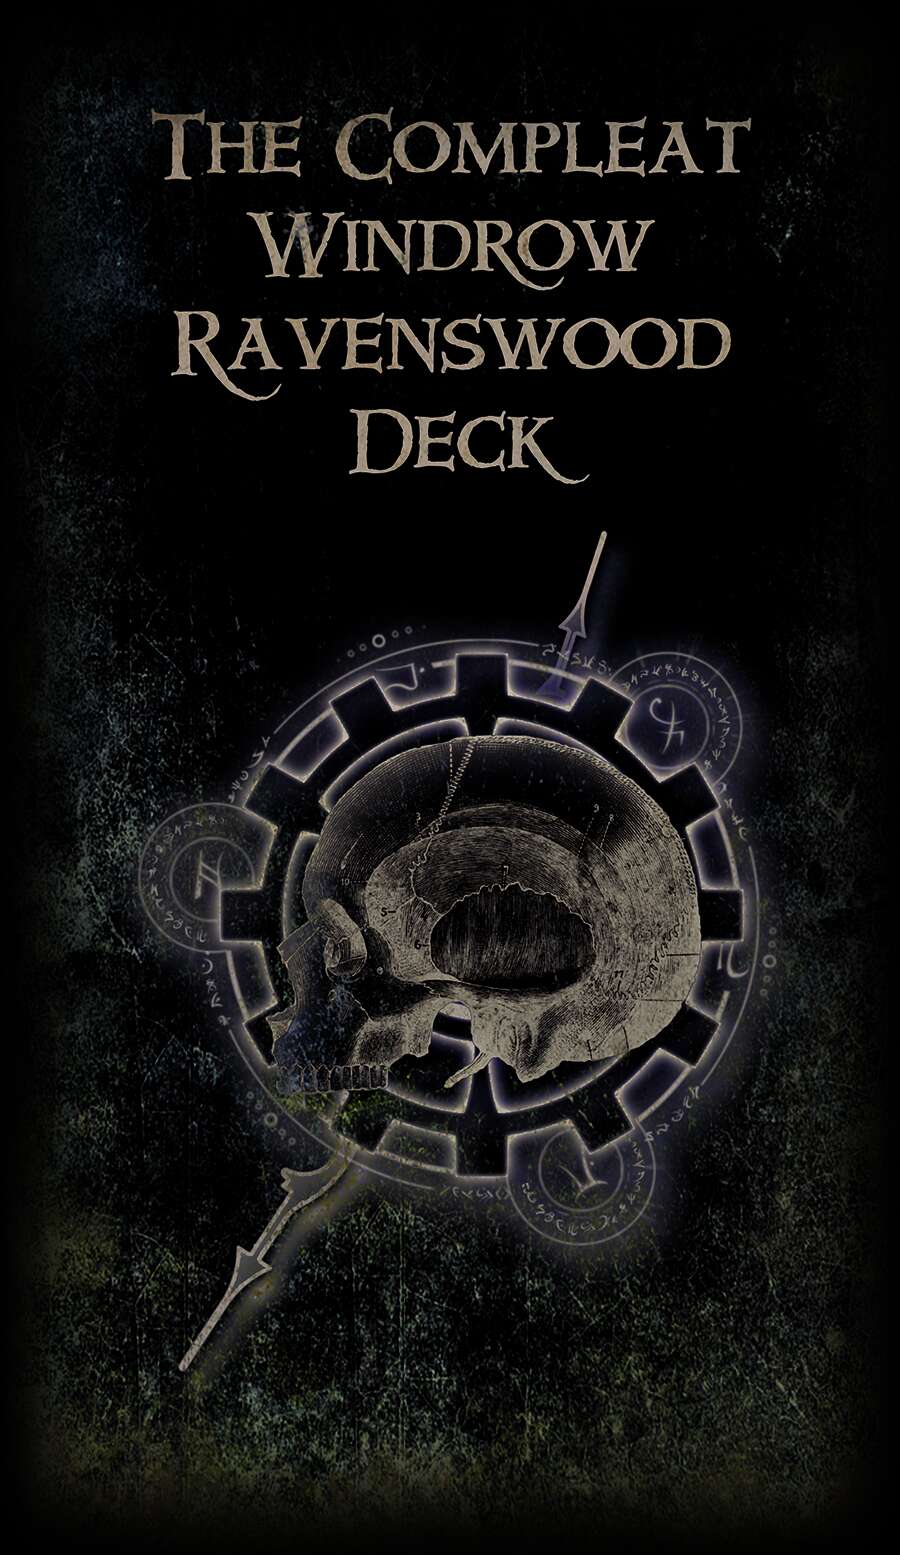 The Compleat Windrow-Ravenswood Deck